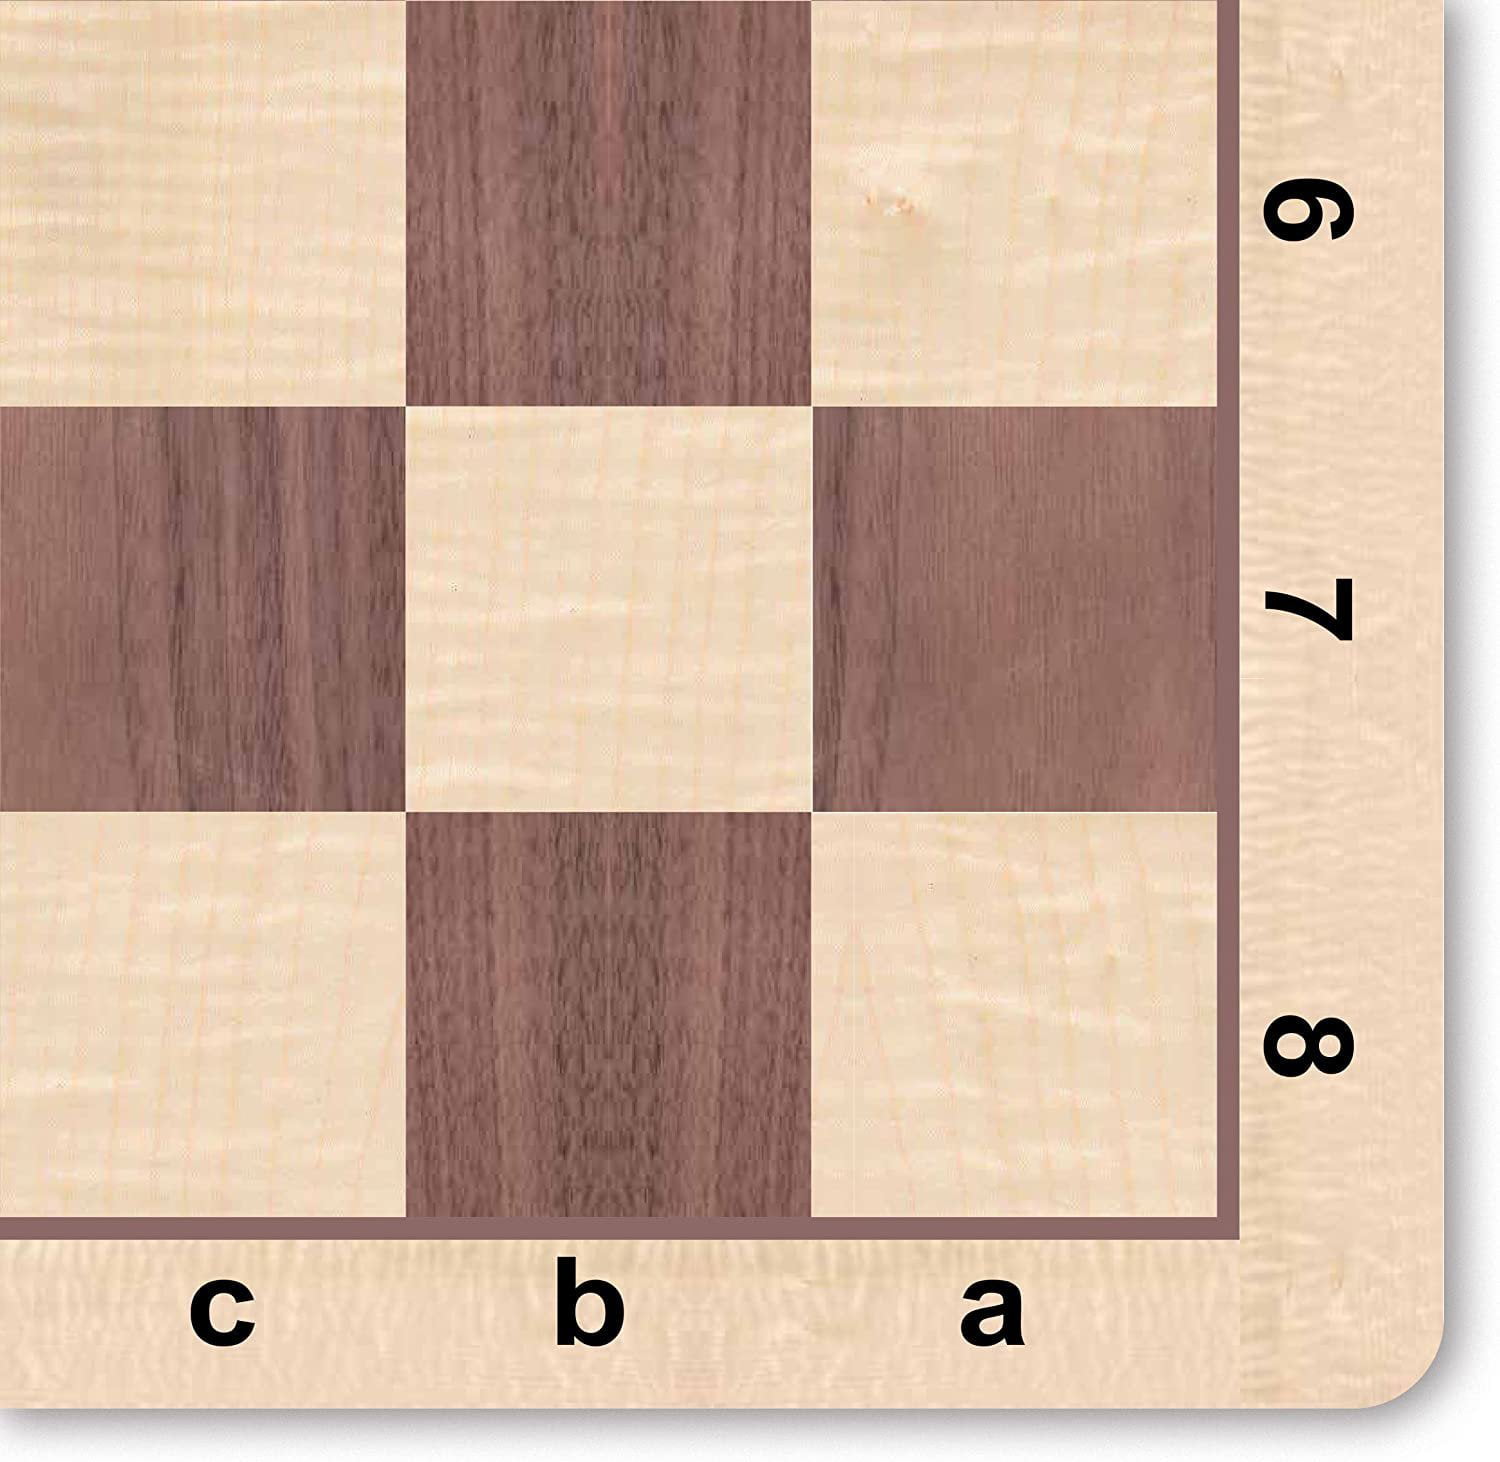 WENGE WITH ROSEWOOD & LIGHT WOOD 20" MOUSEPAD CHESS BOARD 